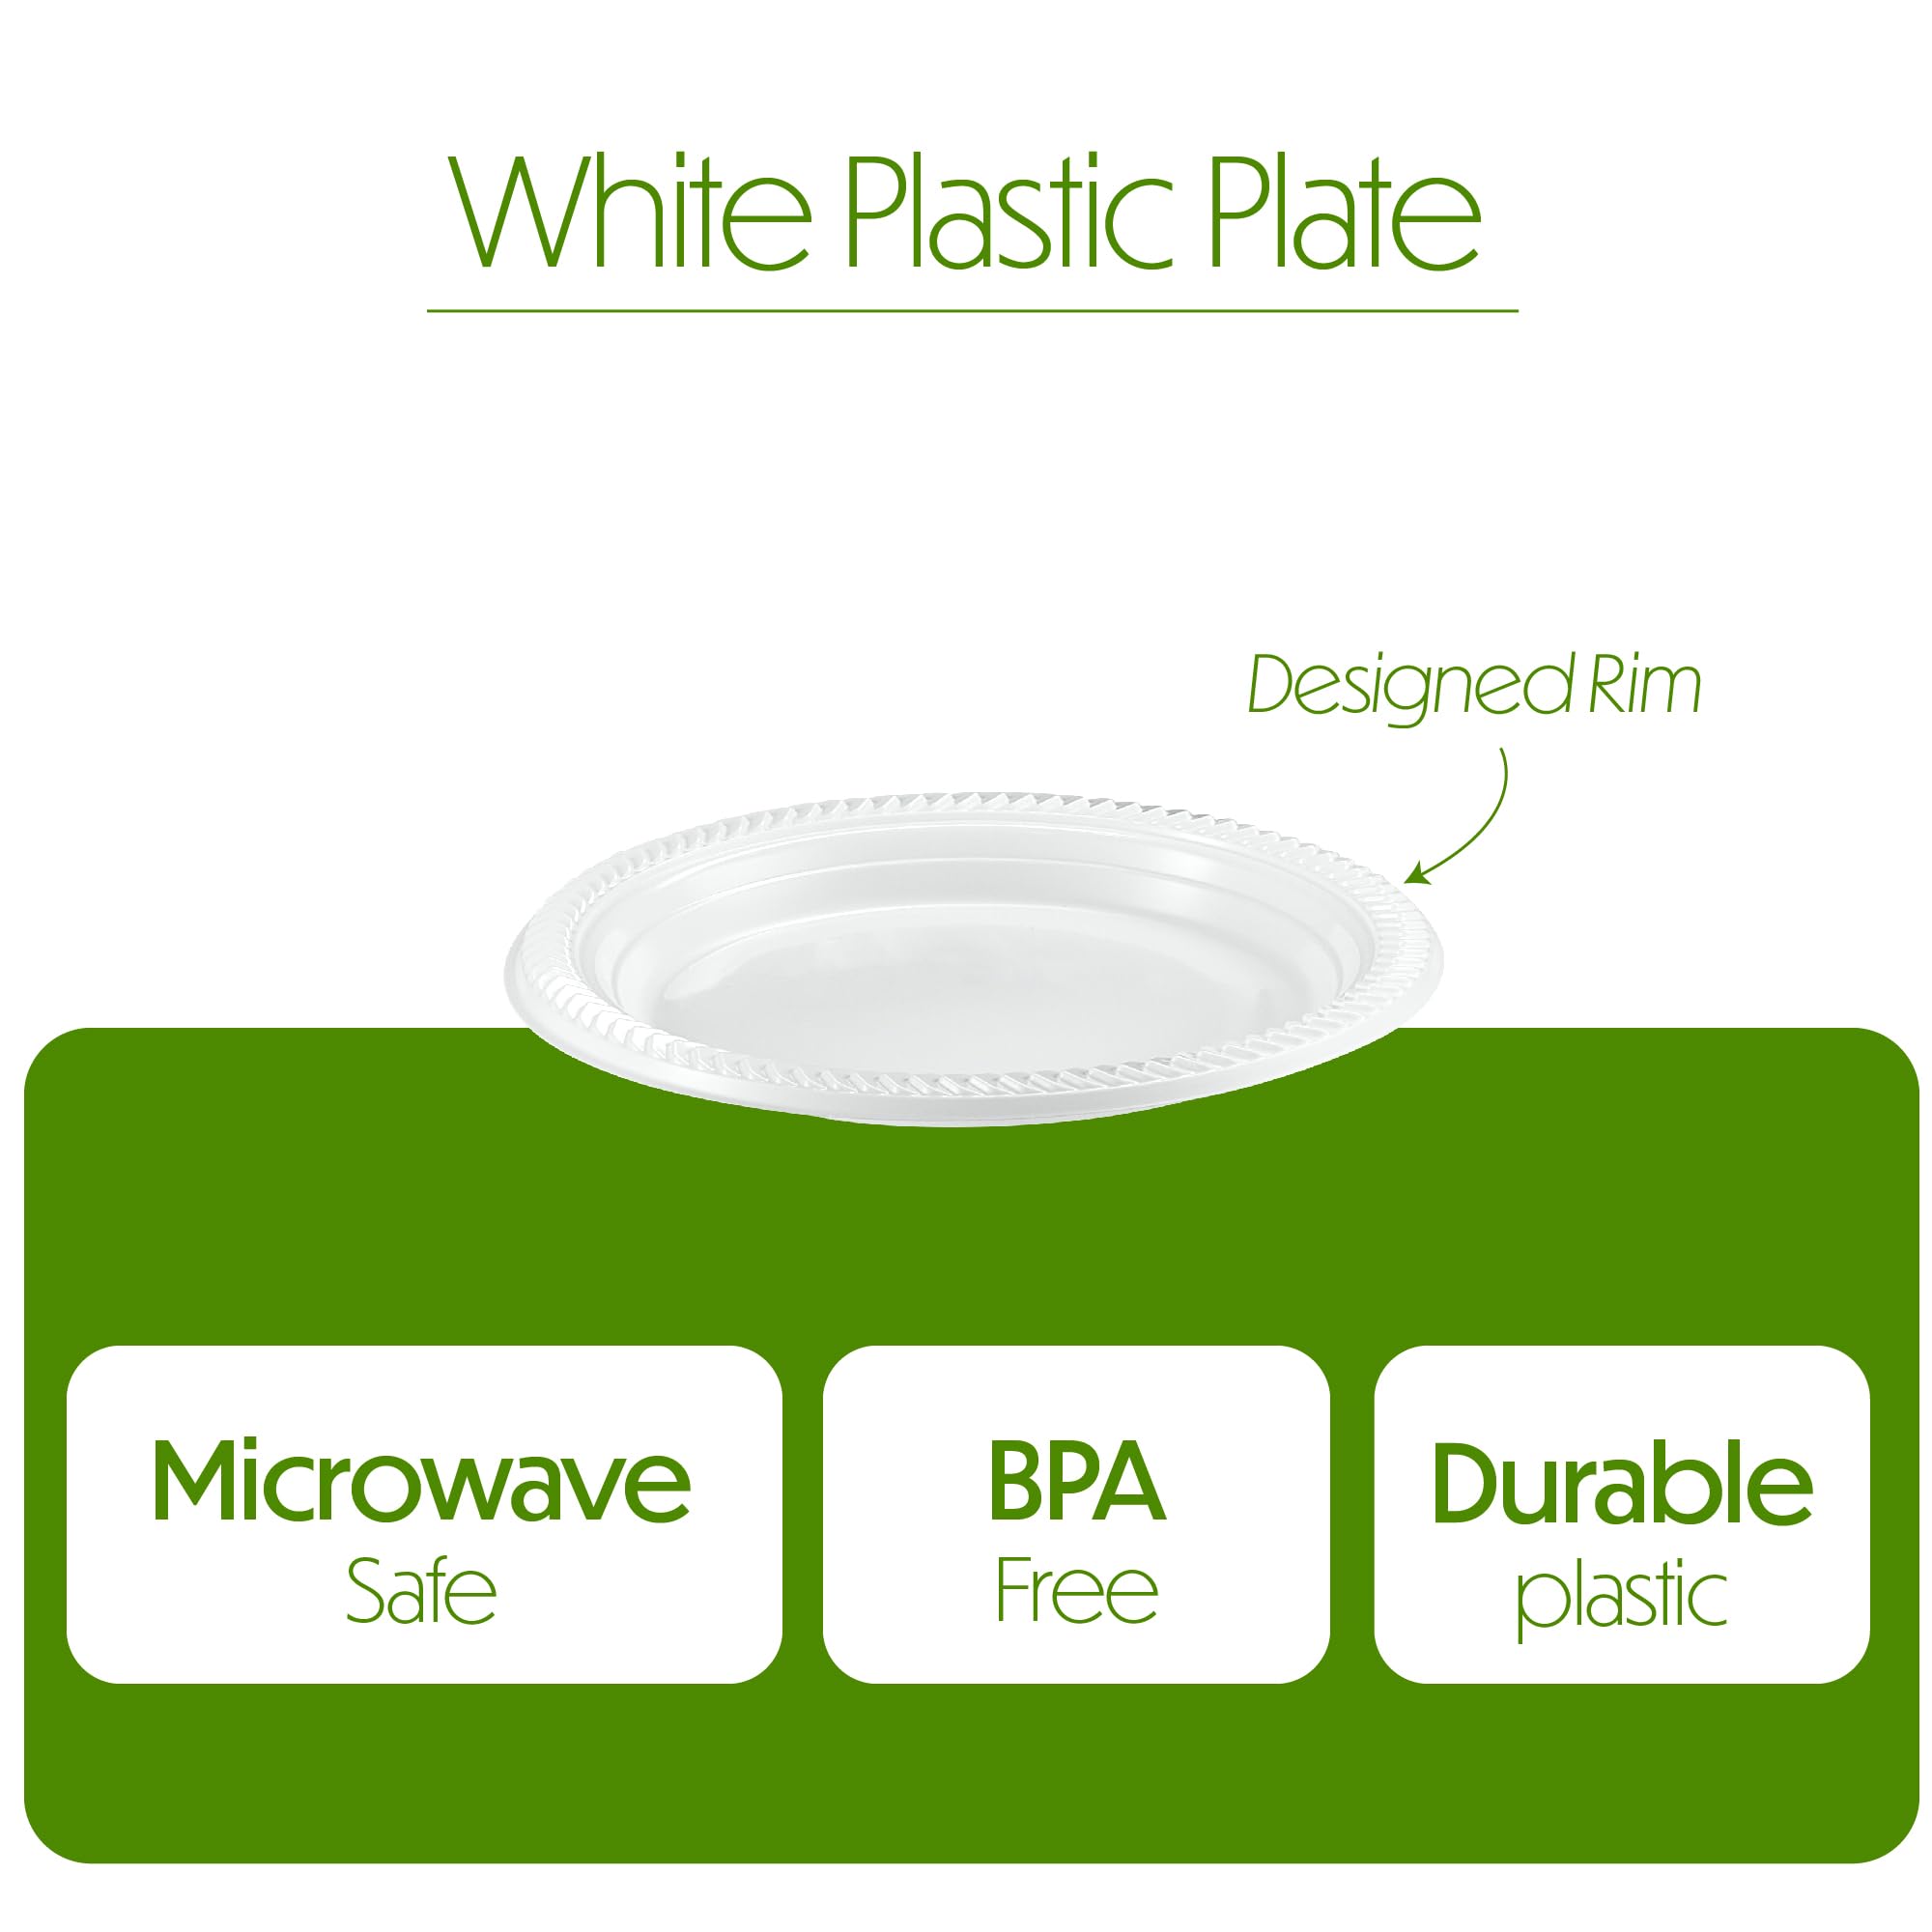 PLASTICPRO 200 PCS White Plastic Round Plastic 7 Inch Plates Premium Quality Light Weight Disposable Plastic Dishes Dinner Plates for Parties Weddings